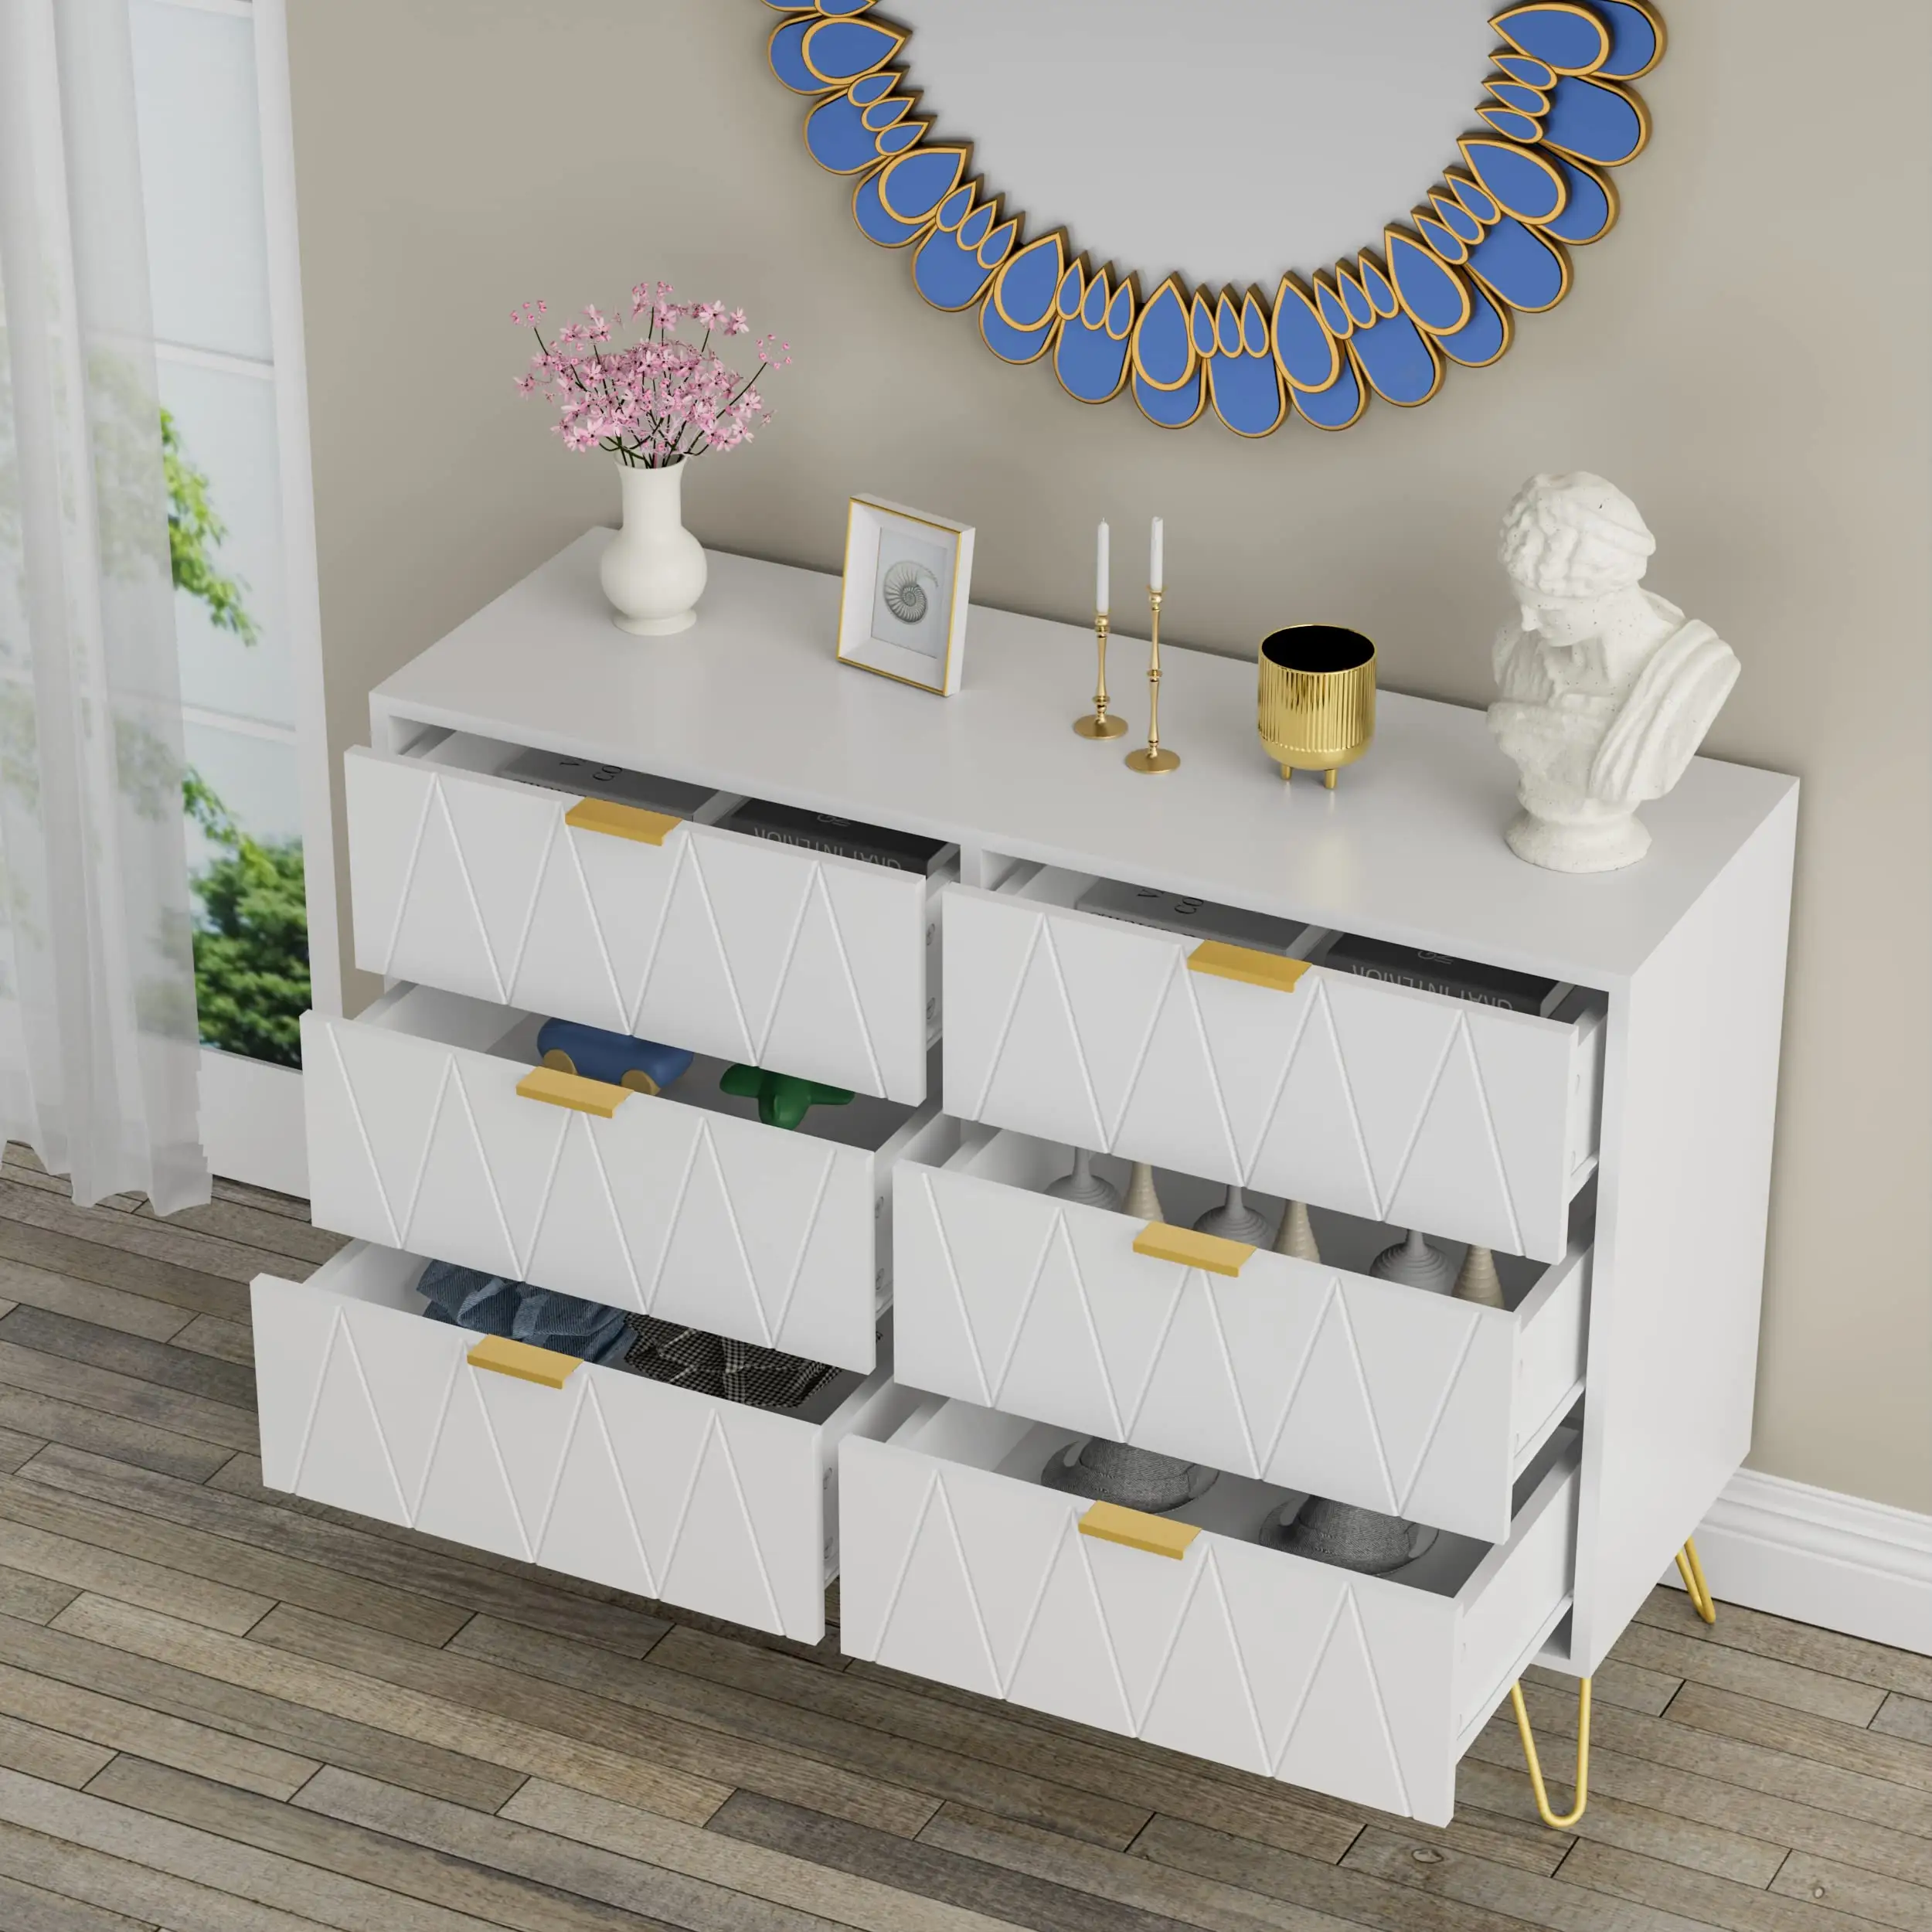 new design hot selling product 6 Drawer Double Dual Chest of Drawers for Bedroom with Gold Handles White